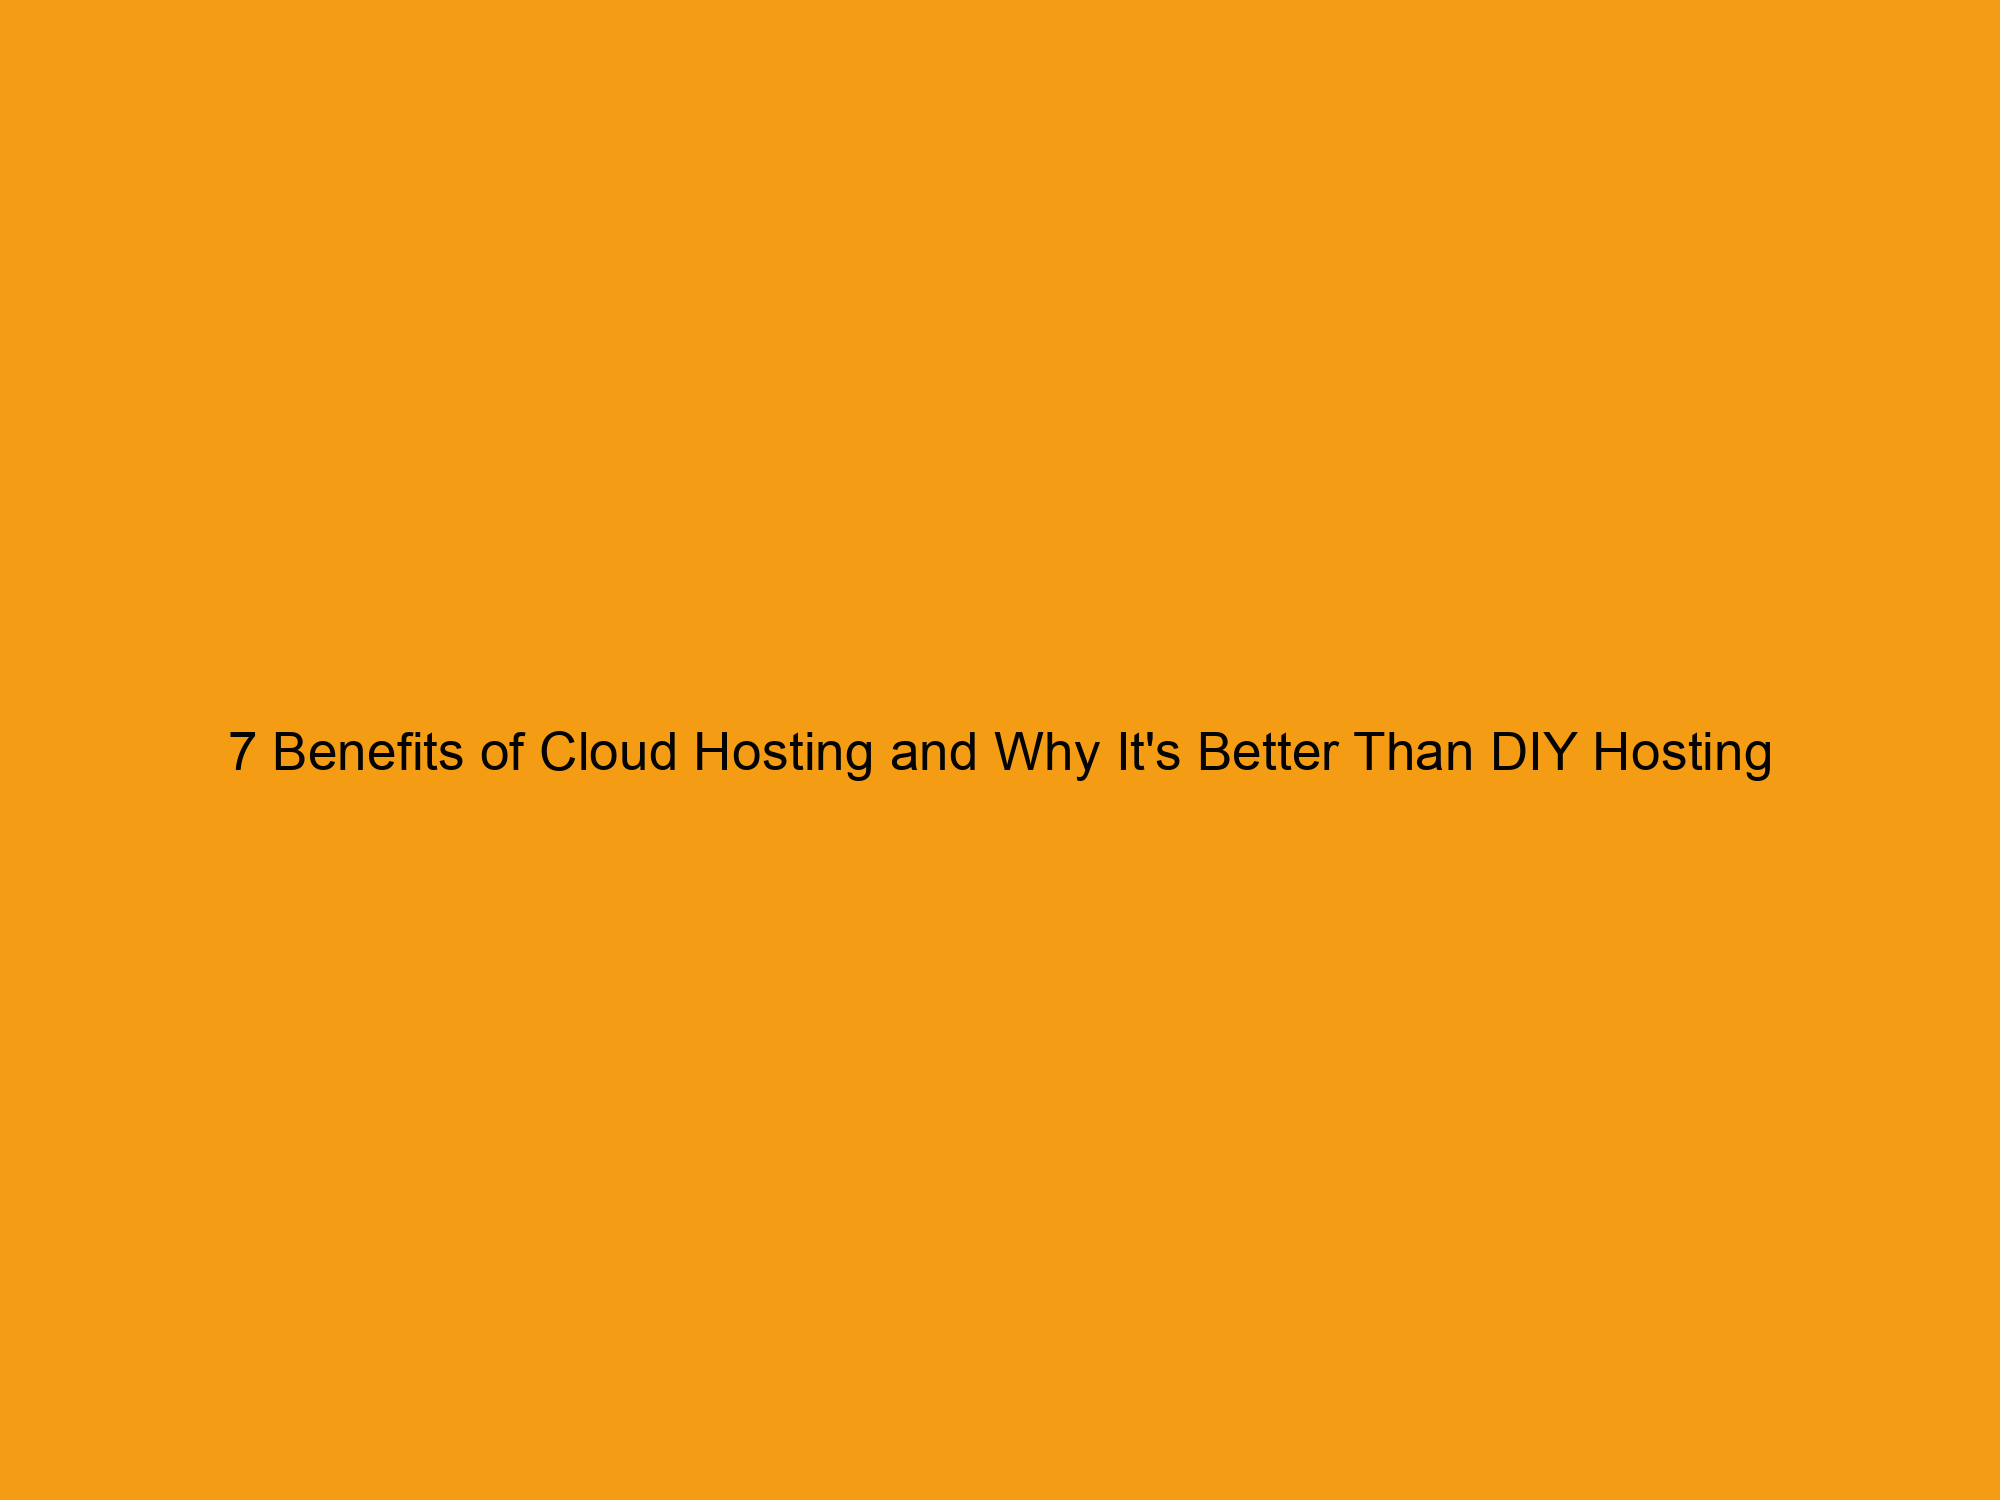 7 Benefits of Cloud Hosting and Why It’s Better Than DIY Hosting